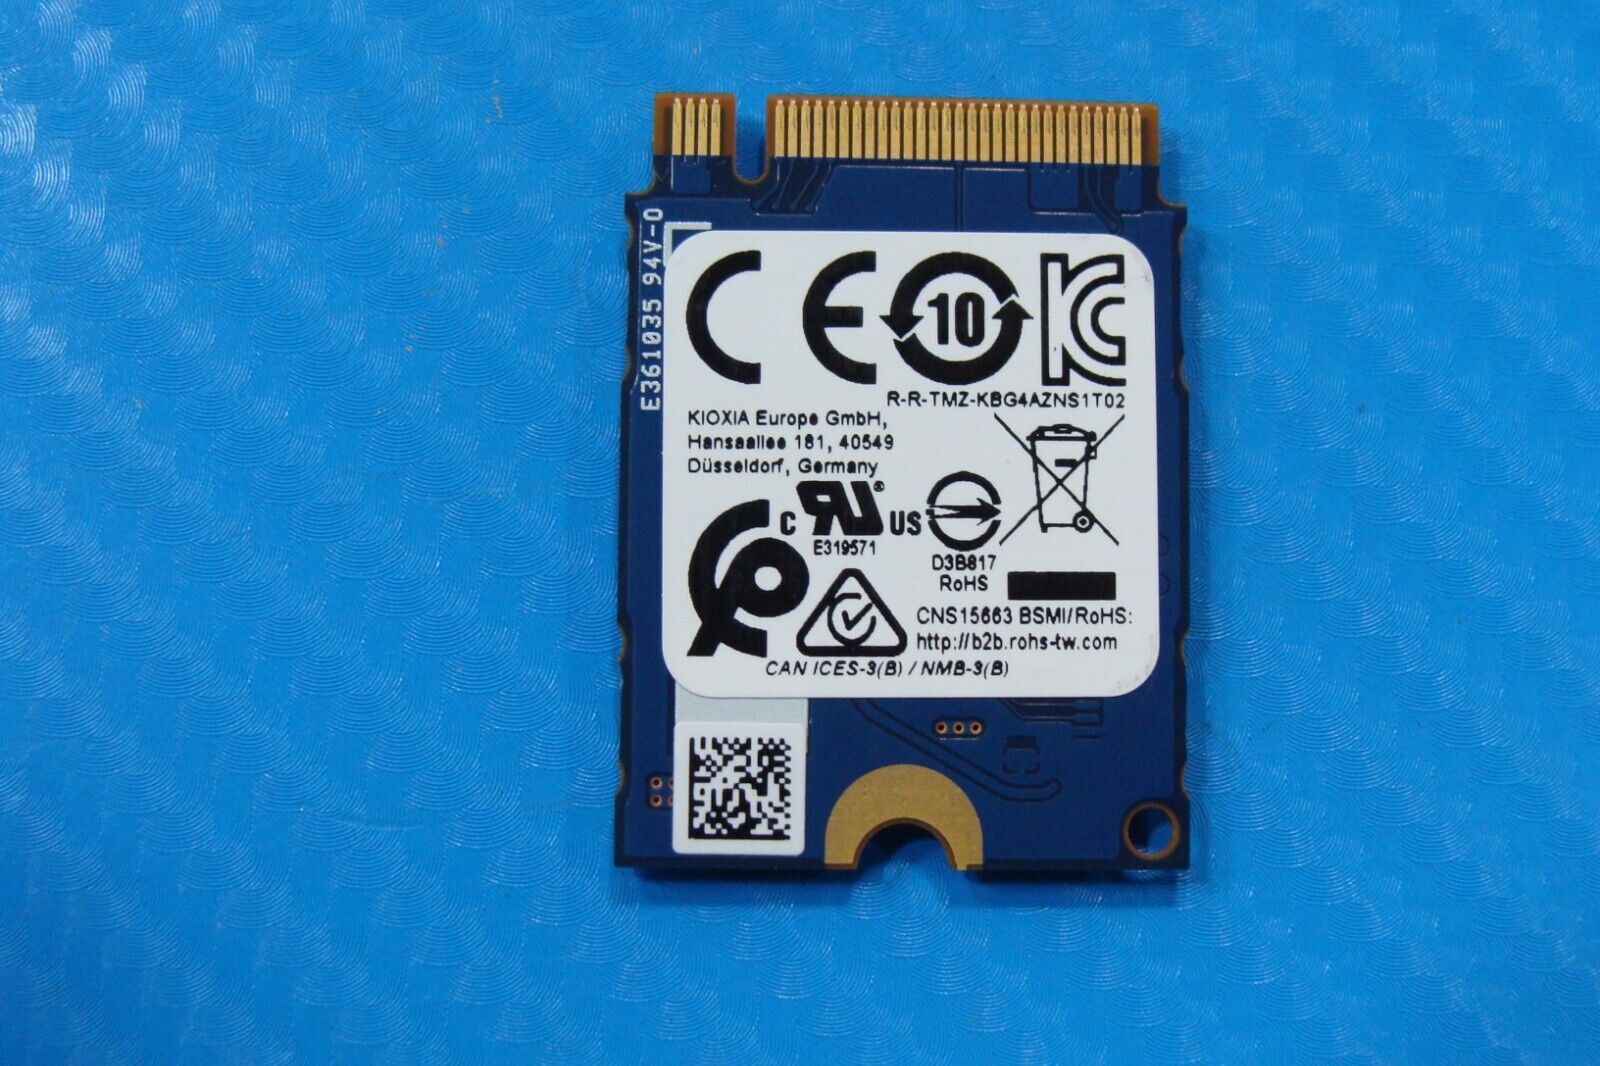 Dell 7410 Kioxia 512GB NVMe M.2 SSD Solid State Drive KBG40ZNS512G 8C3CP